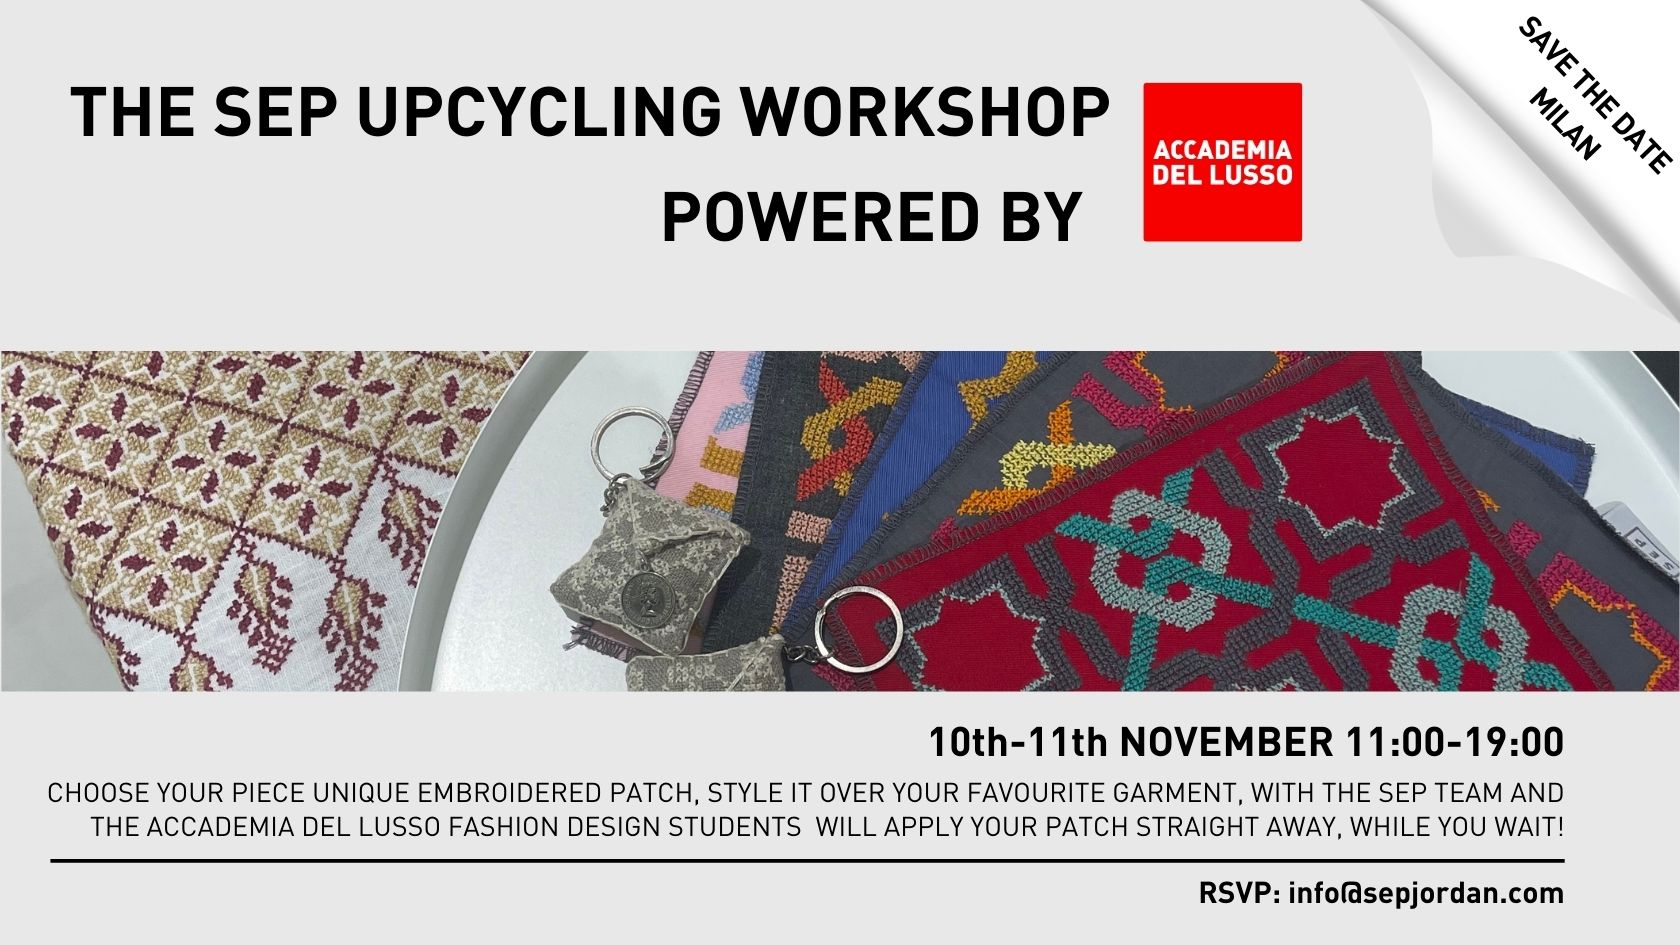 THE SEP UPCYCLING WORKSHOP - POWERED BY ACCADEMIA DEL LUSSO